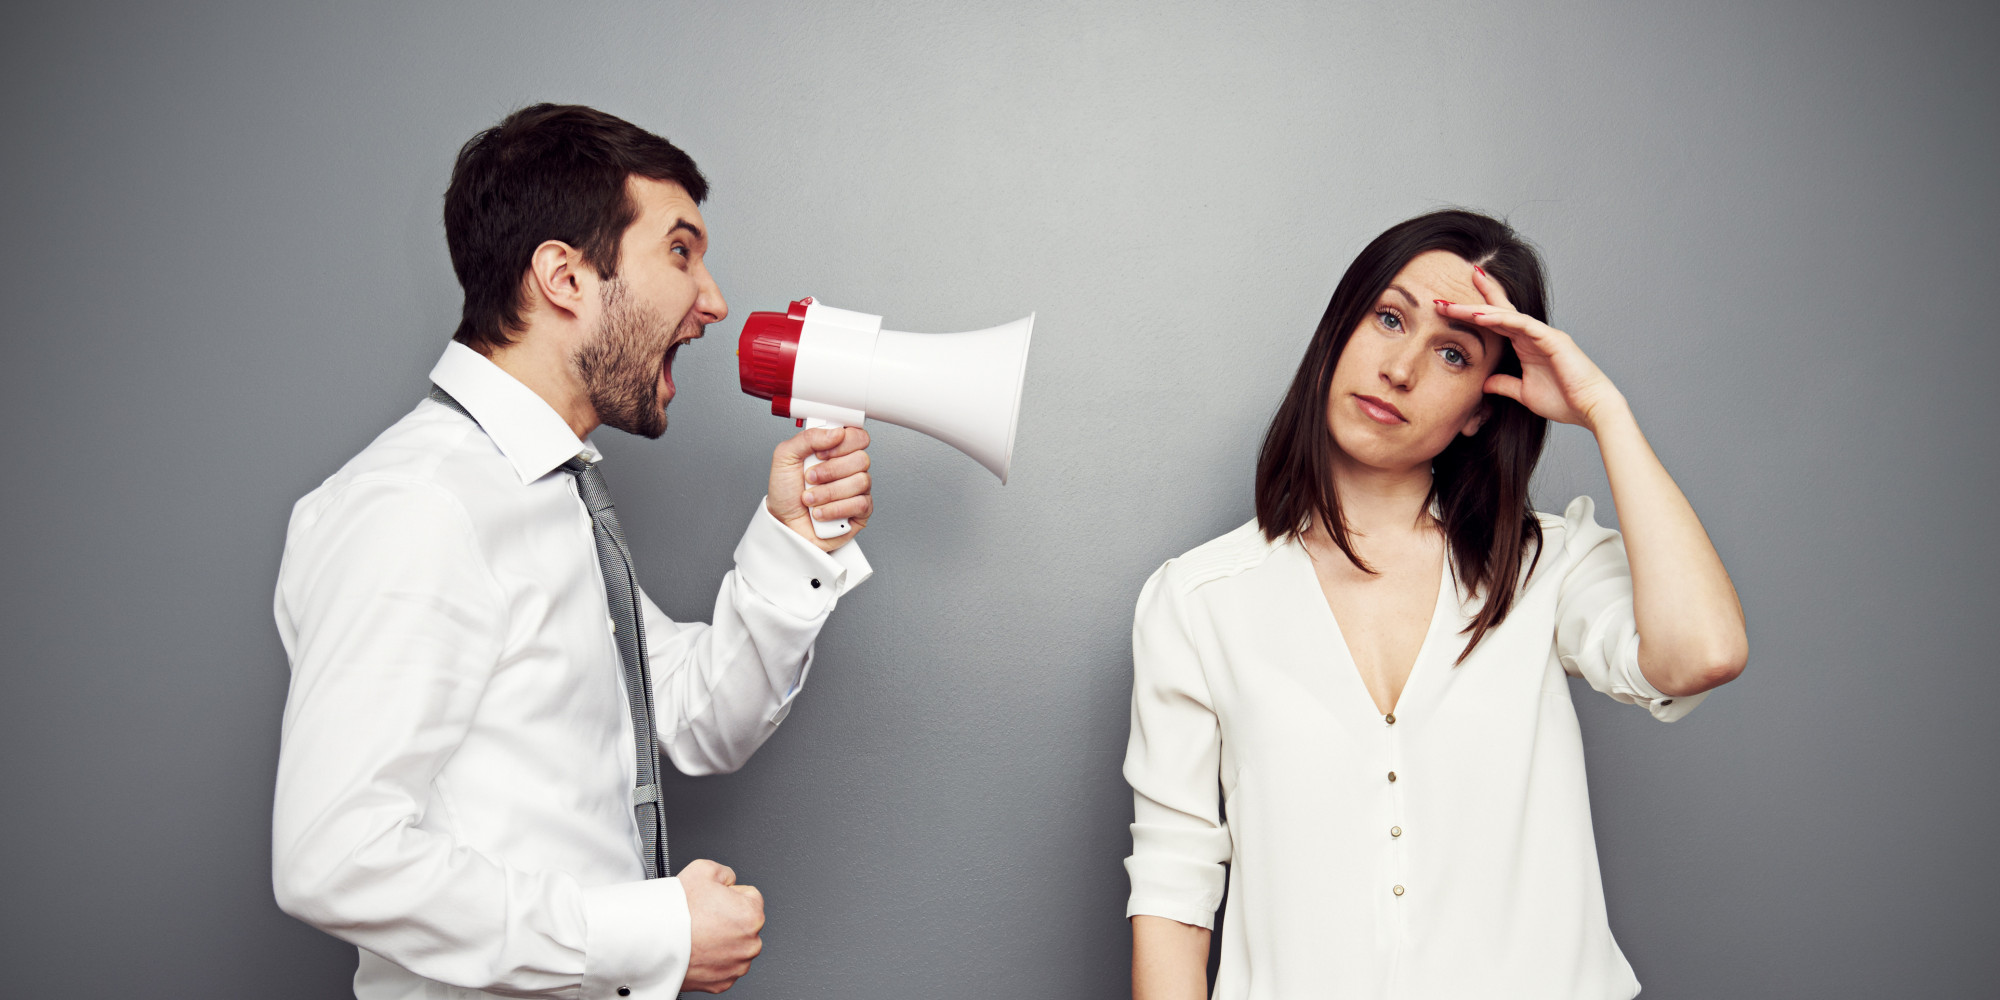 Women Don't Talk More Than Men, They're Just More Likely To ...